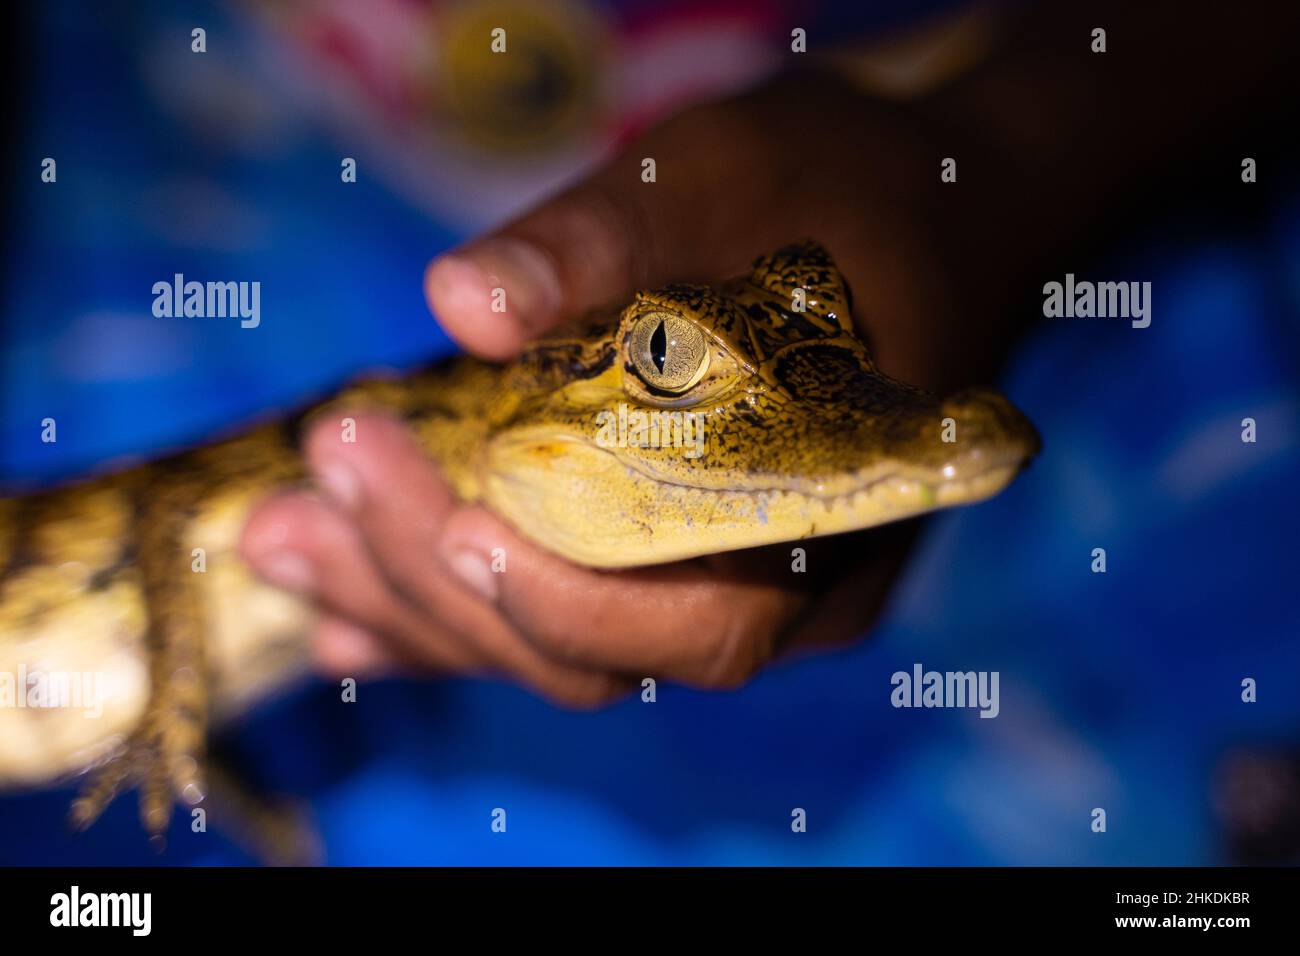 Discovery of caiman during a nocturnal canoe trip, Amazonia, Colombia Stock Photo